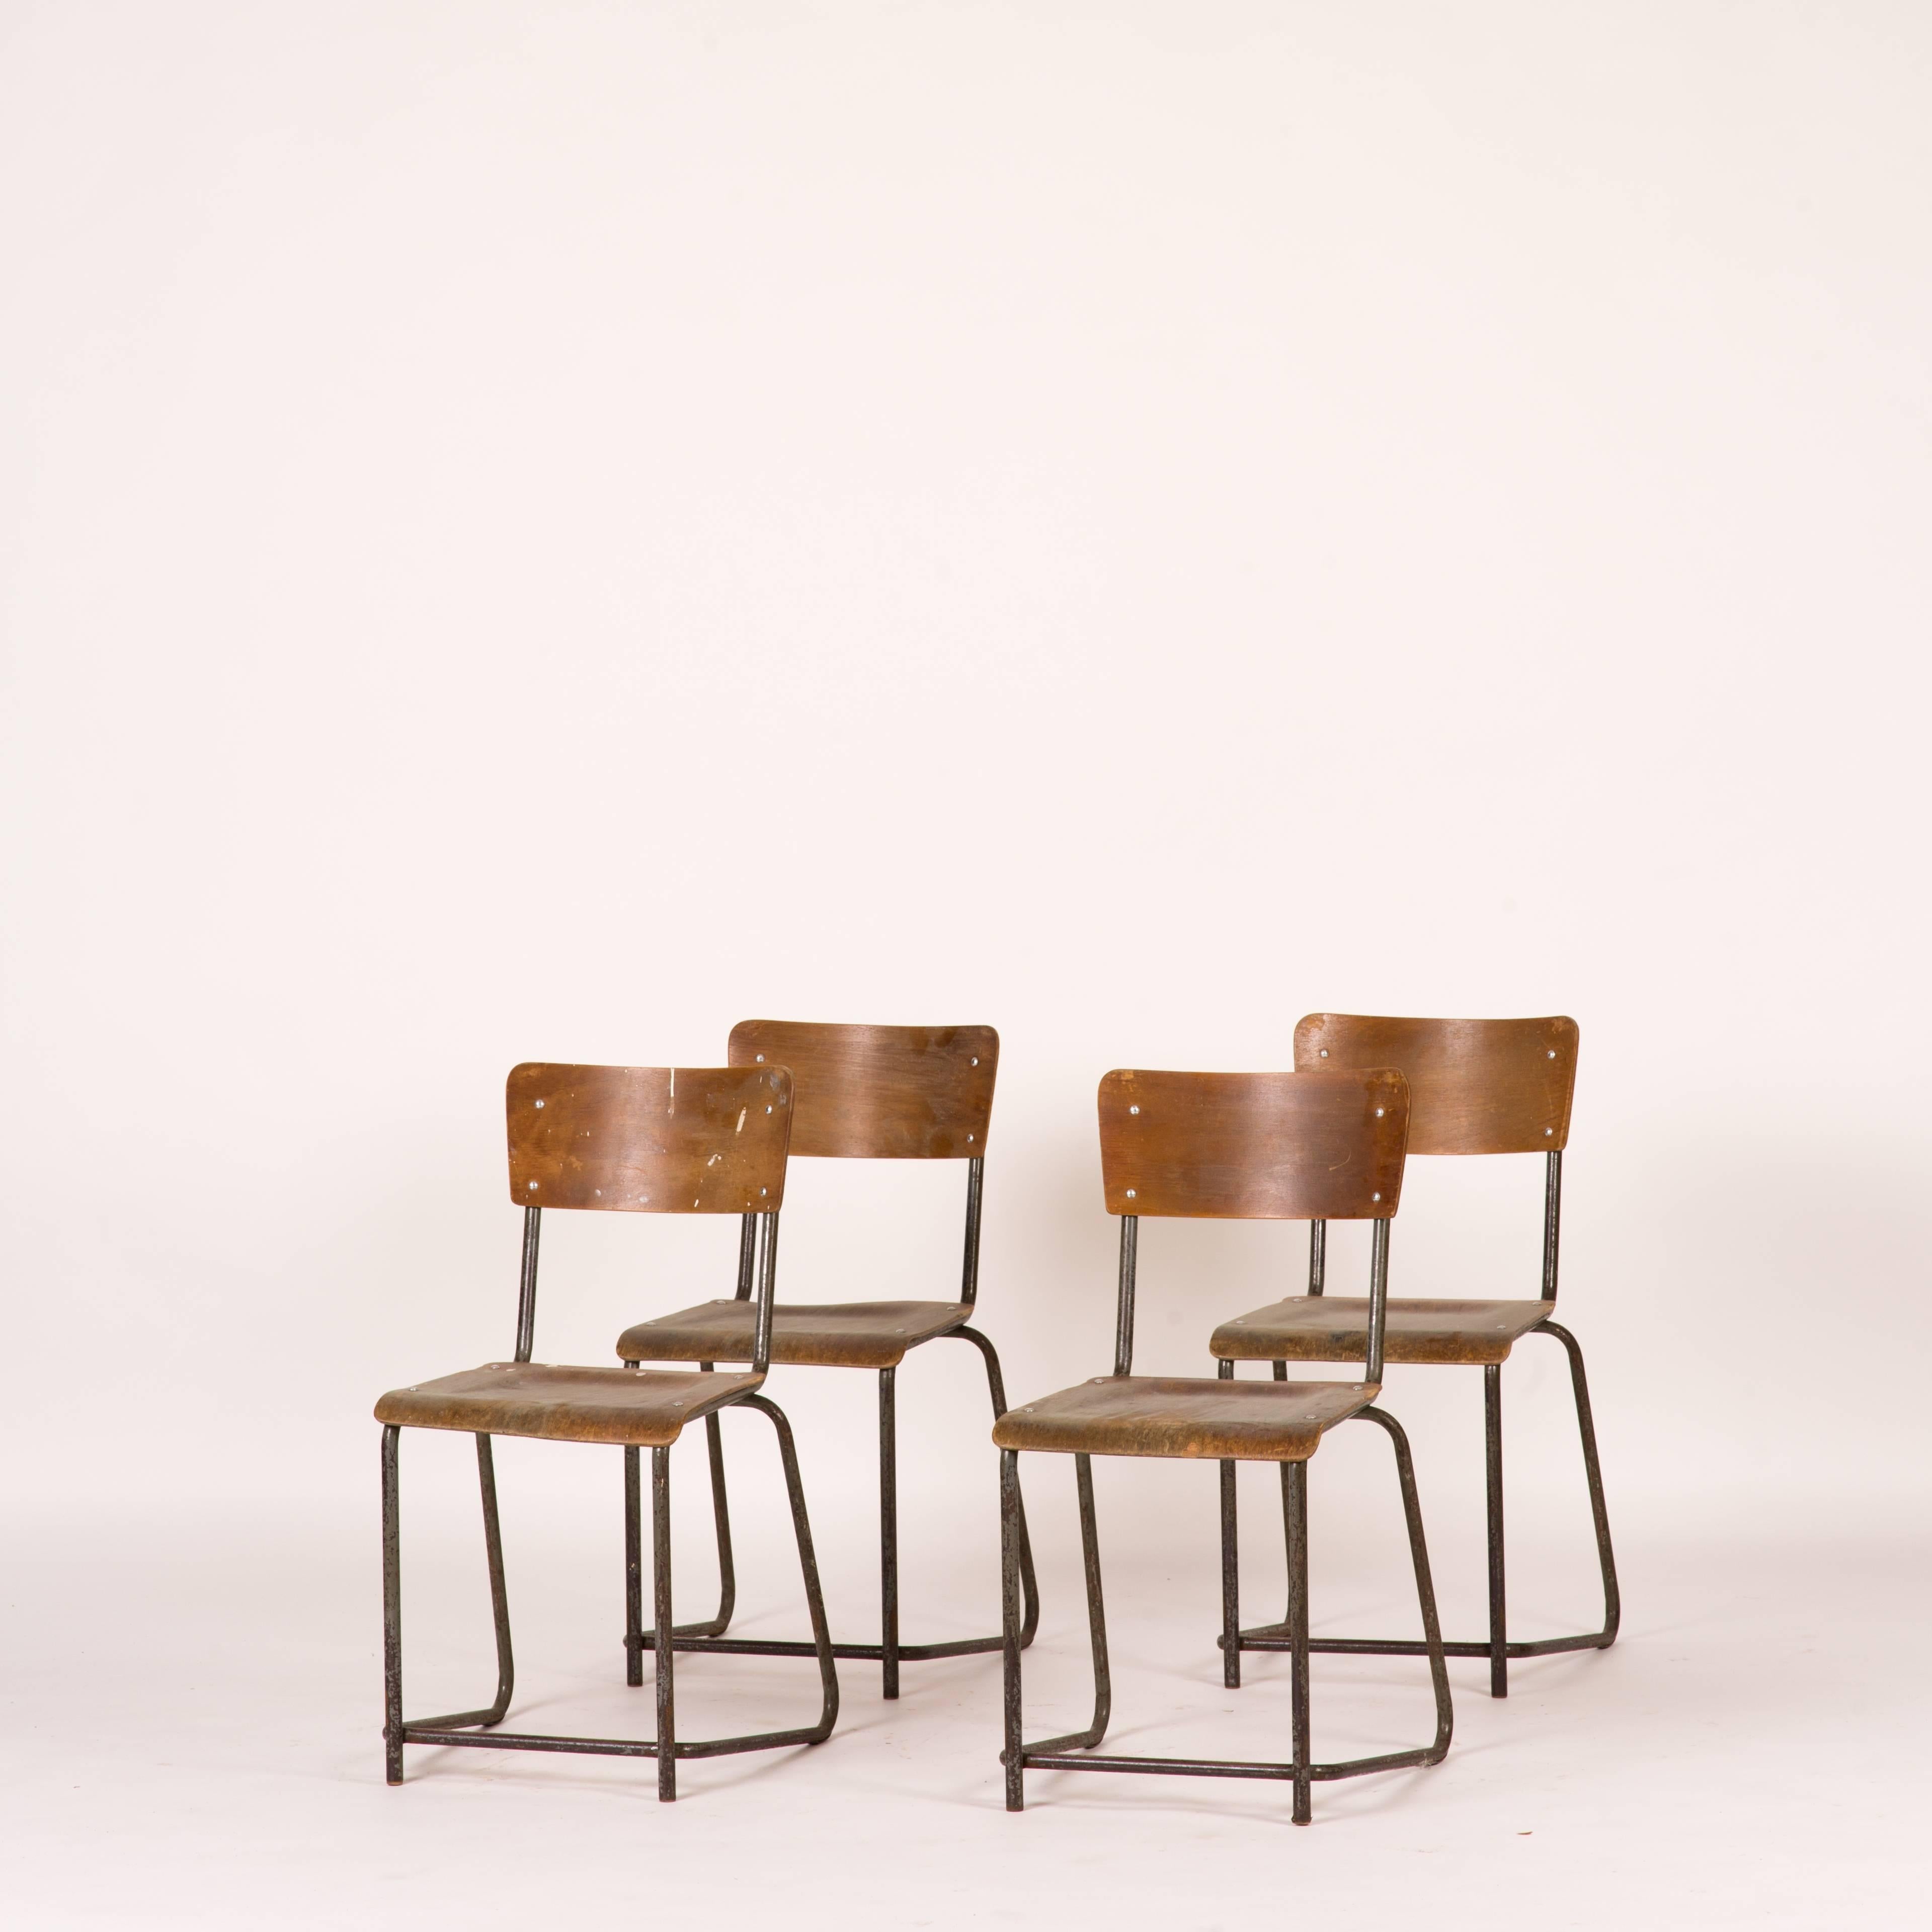 Set of 8 metal and bentwood dining chairs from 1930s England. The metal legs have a wonderfully minimal design and mild patina. The bentwood seats curve gently for a sleek and relaxed look. Due to their understated simplicity, this set would work